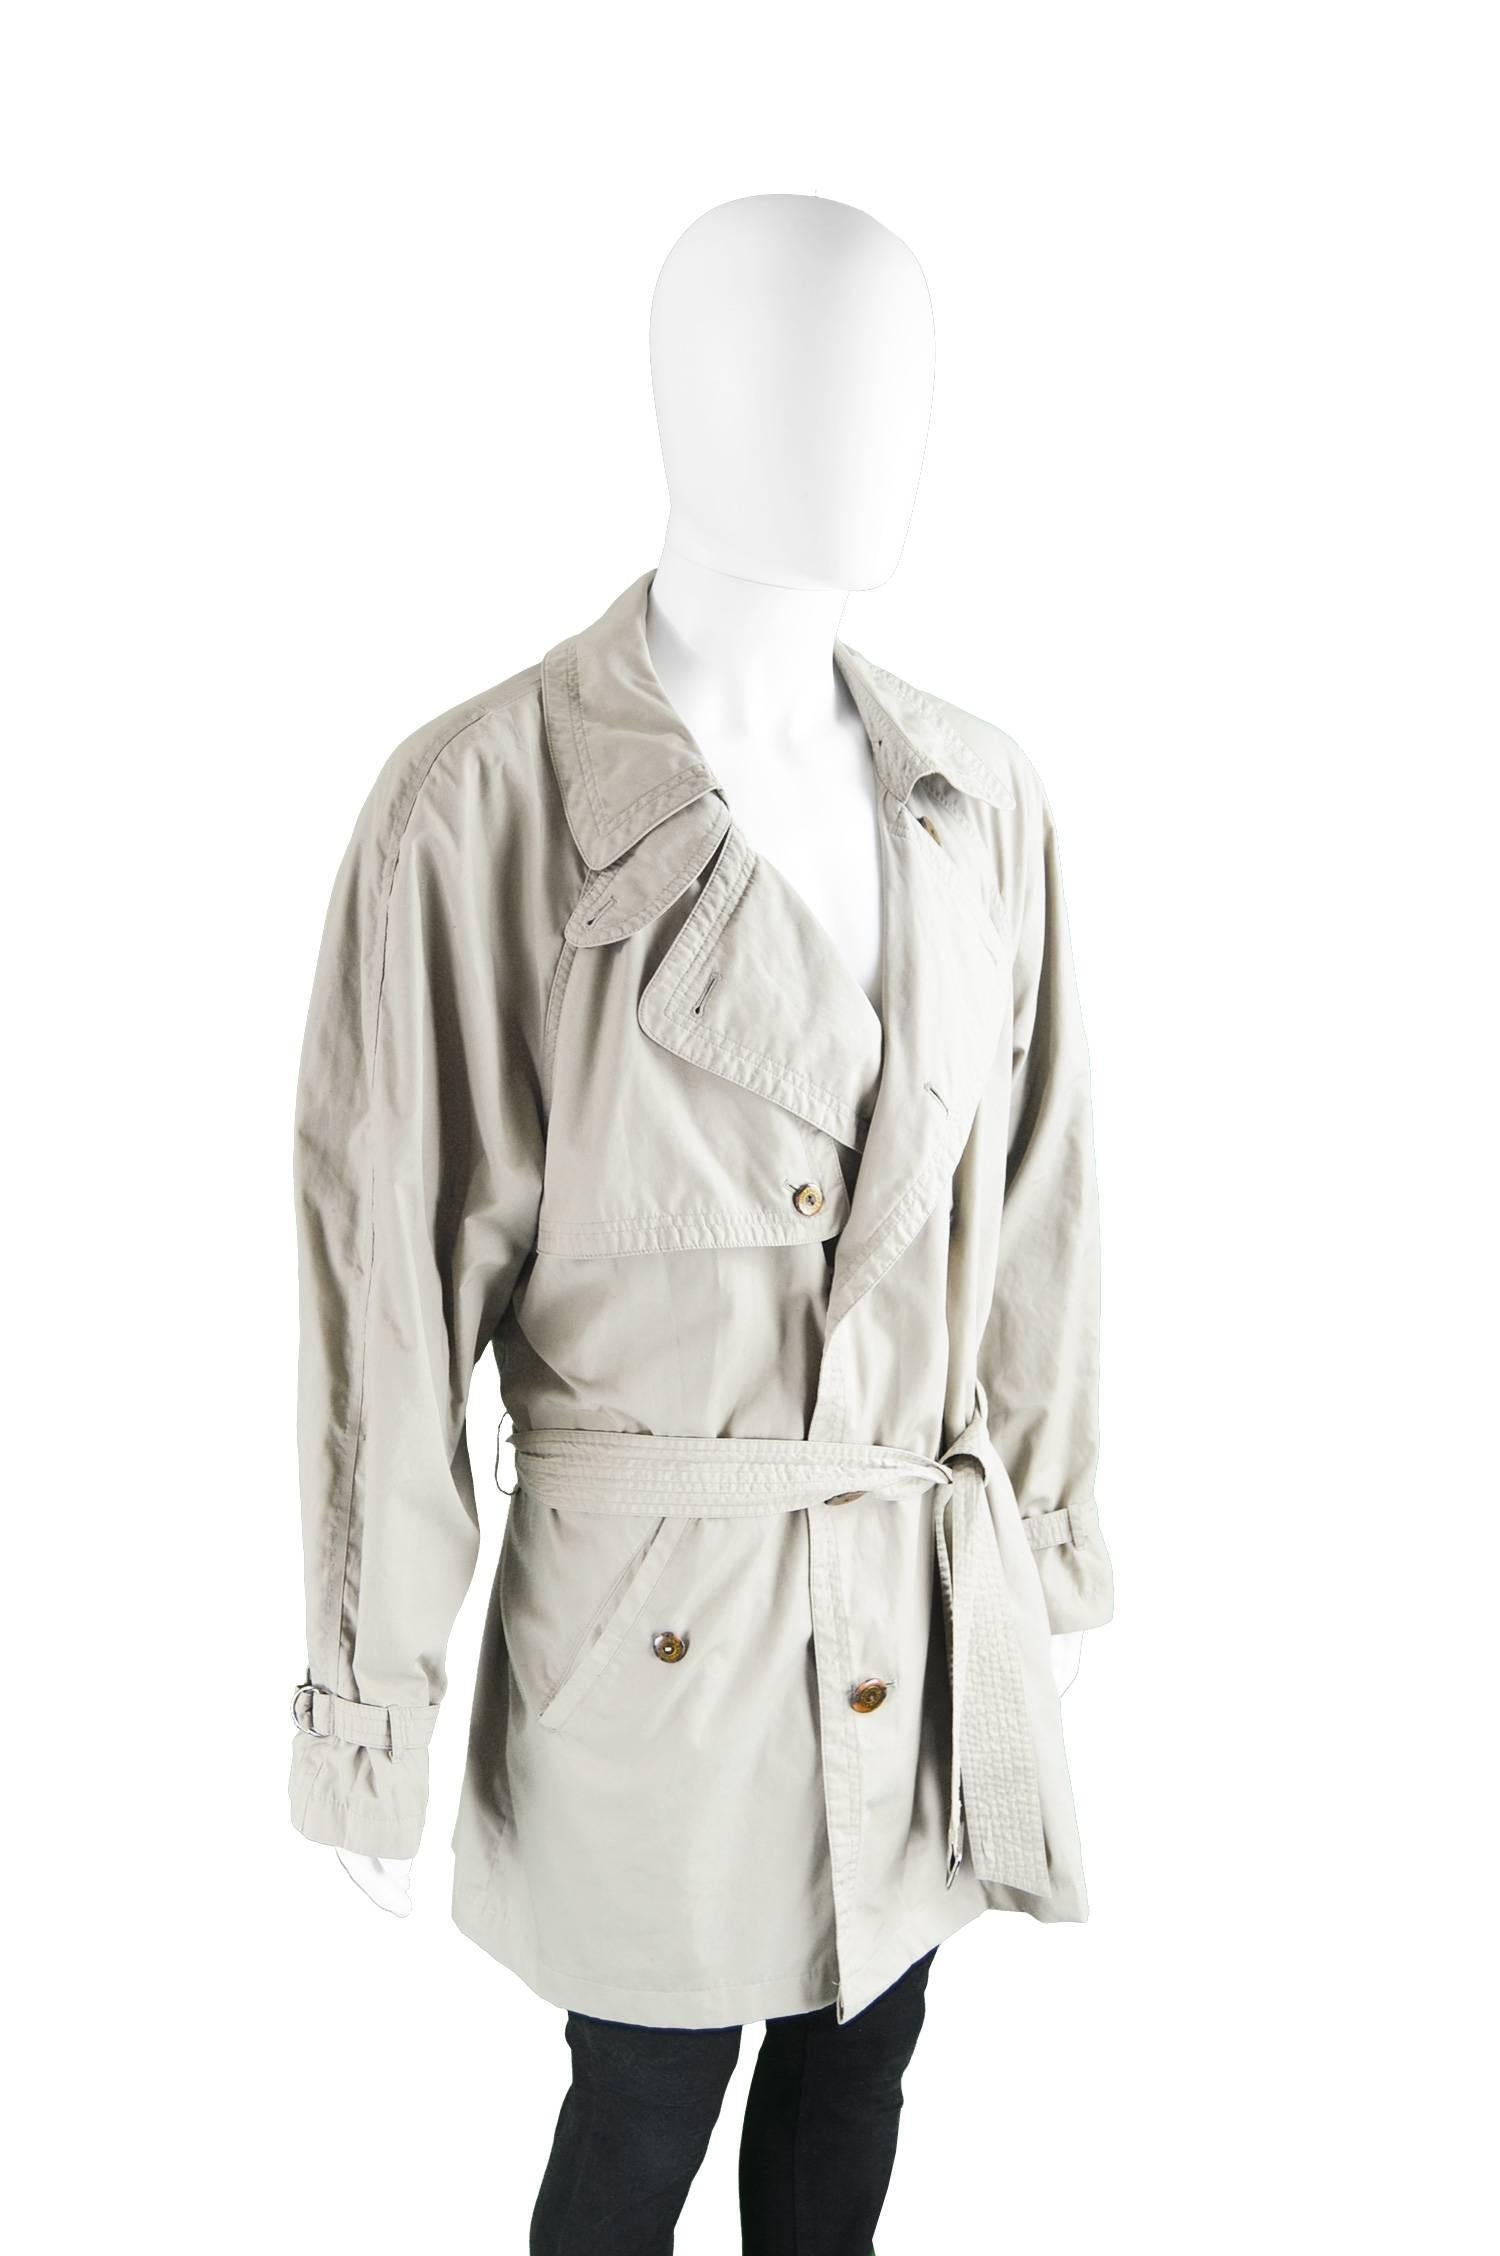 Gray Yves Saint Laurent Men's Lightweight Cotton Double Breasted Trenchcoat, 1990s For Sale